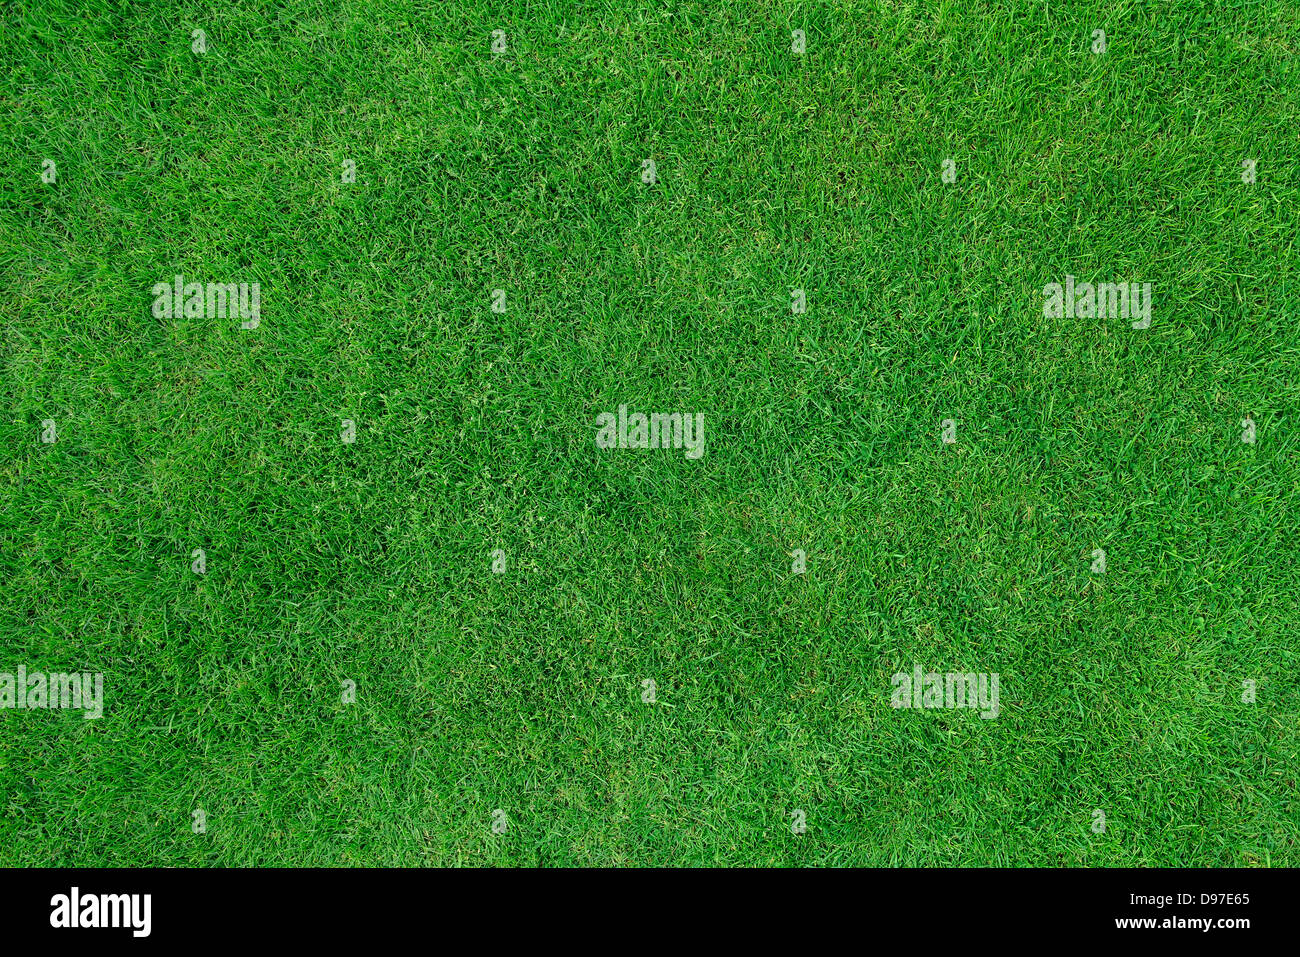 Grass Lawn, Close Up. Stock Photo